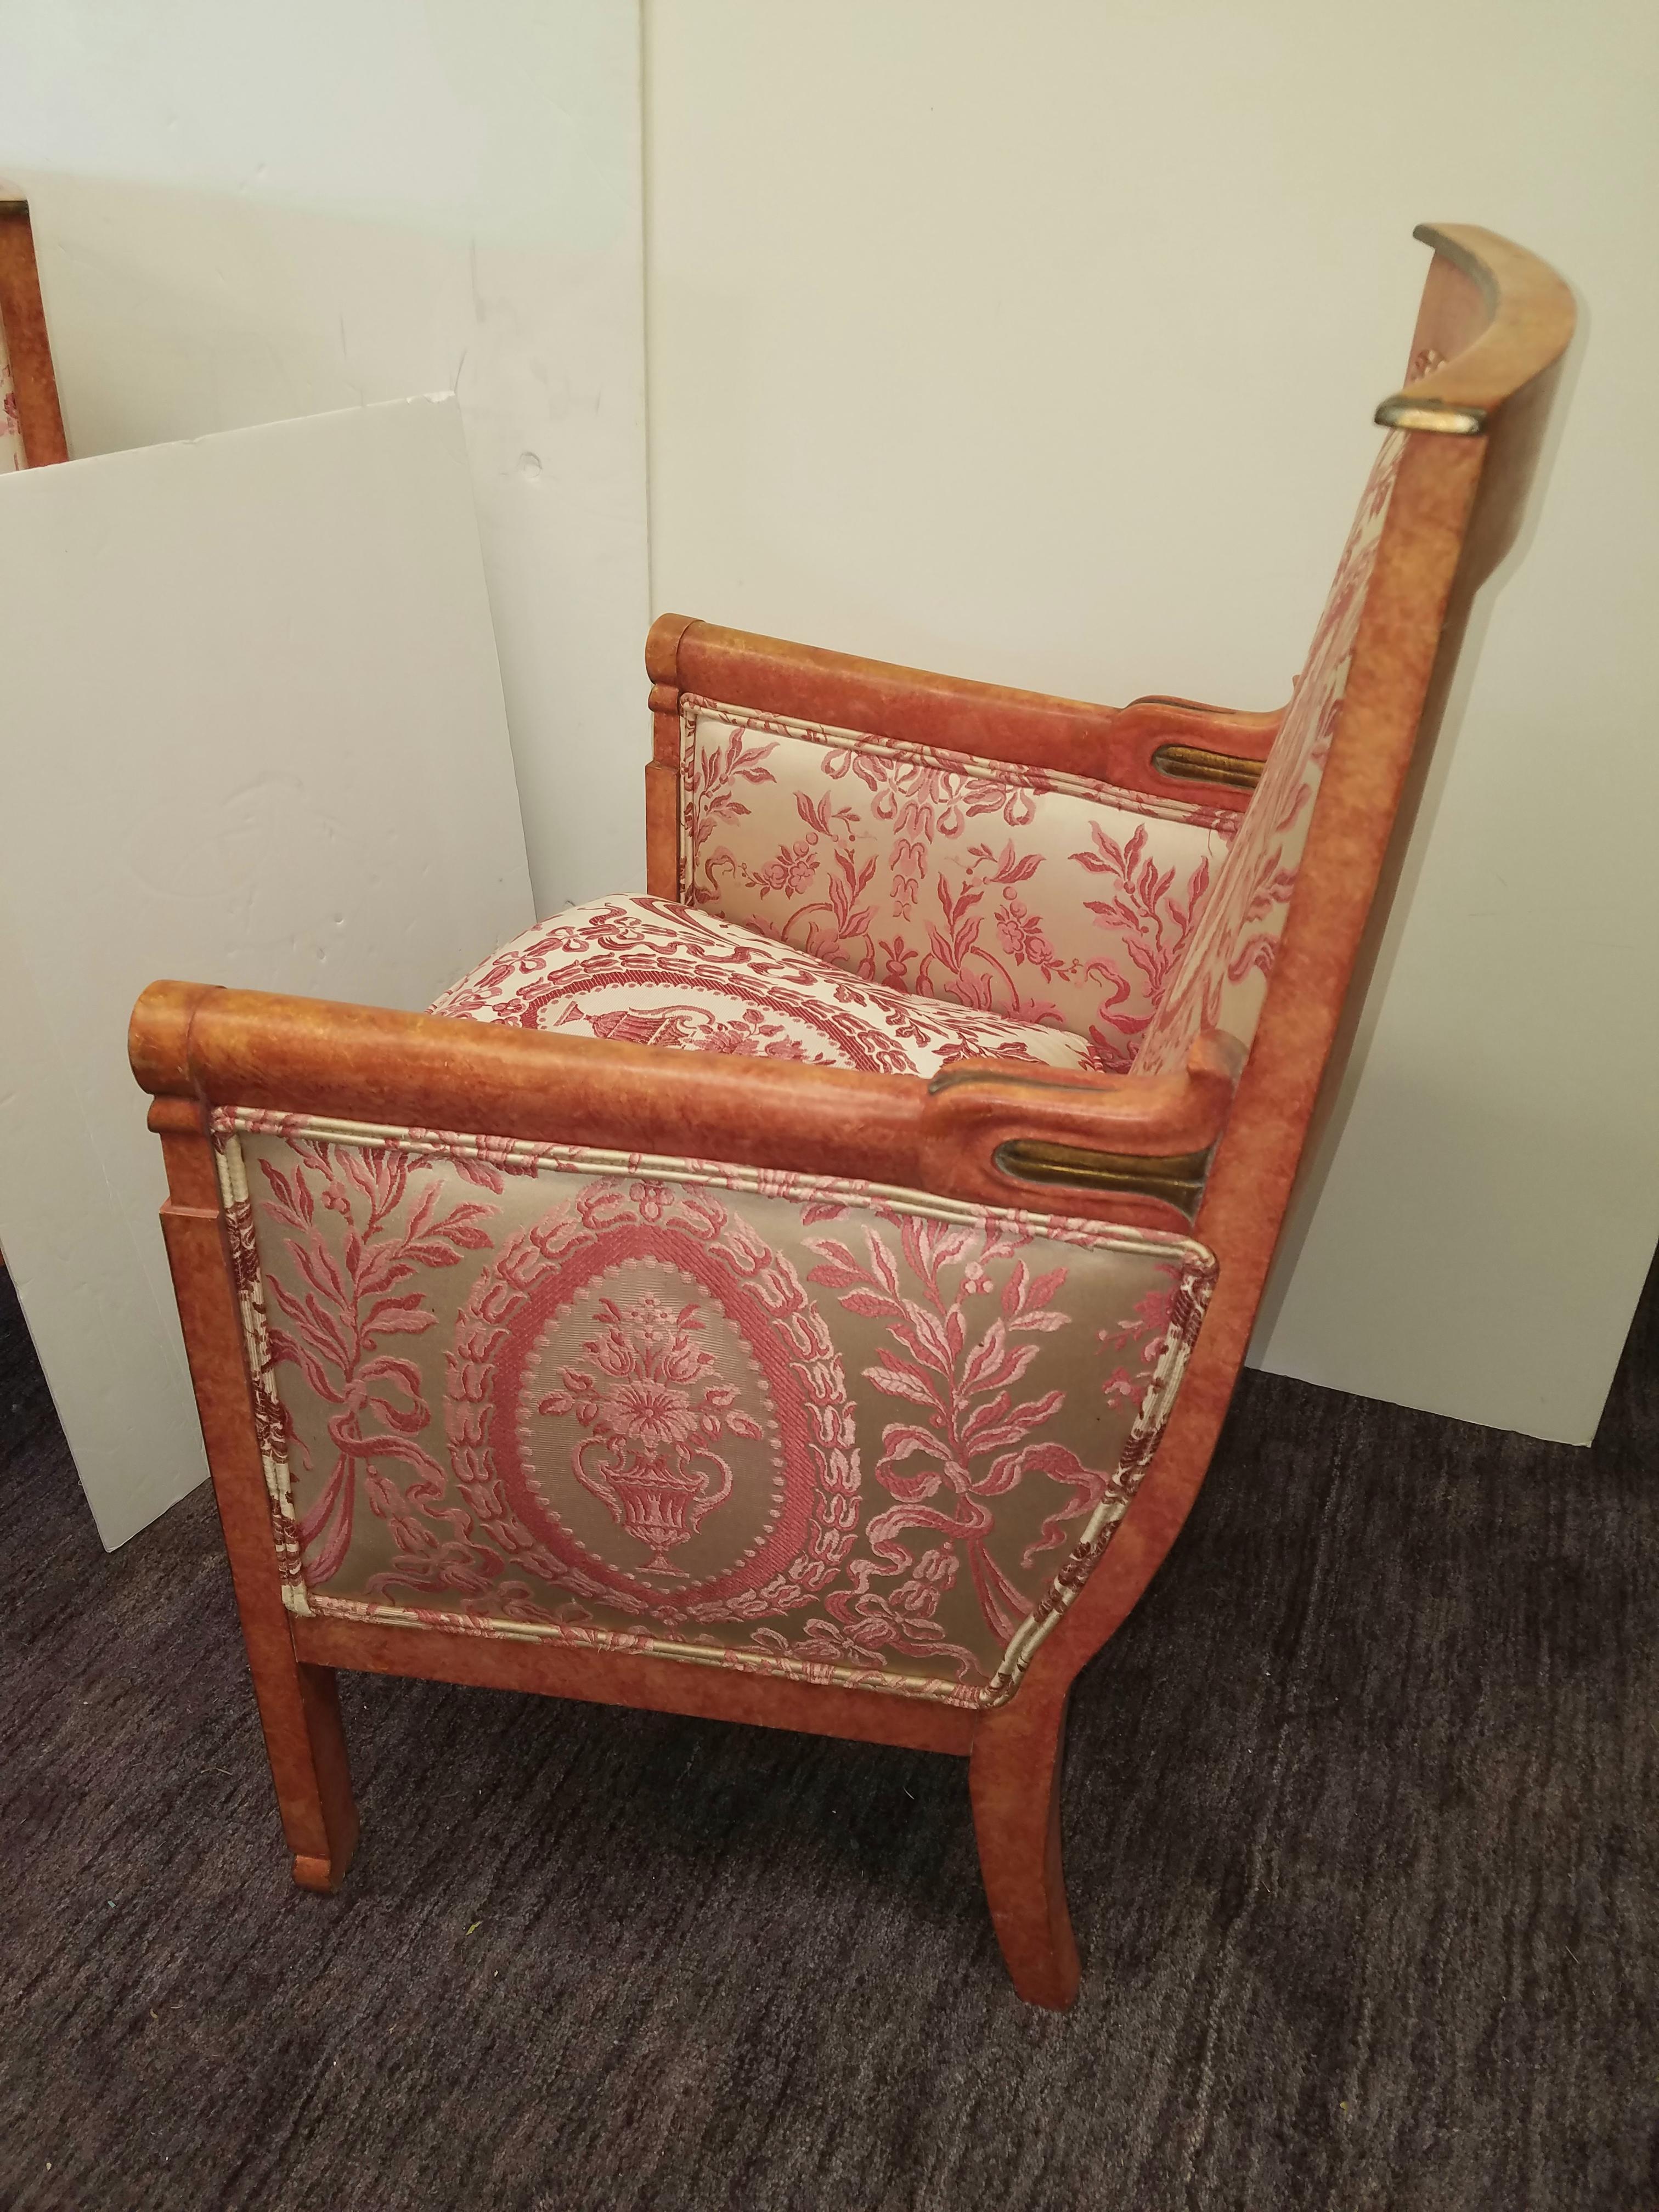 A pair of elegant 1920s Empire style armchairs with coral painted finish upholstered in ivory and rose woven silk. Down seat cushions. The painted frames with gilt highlights.
        